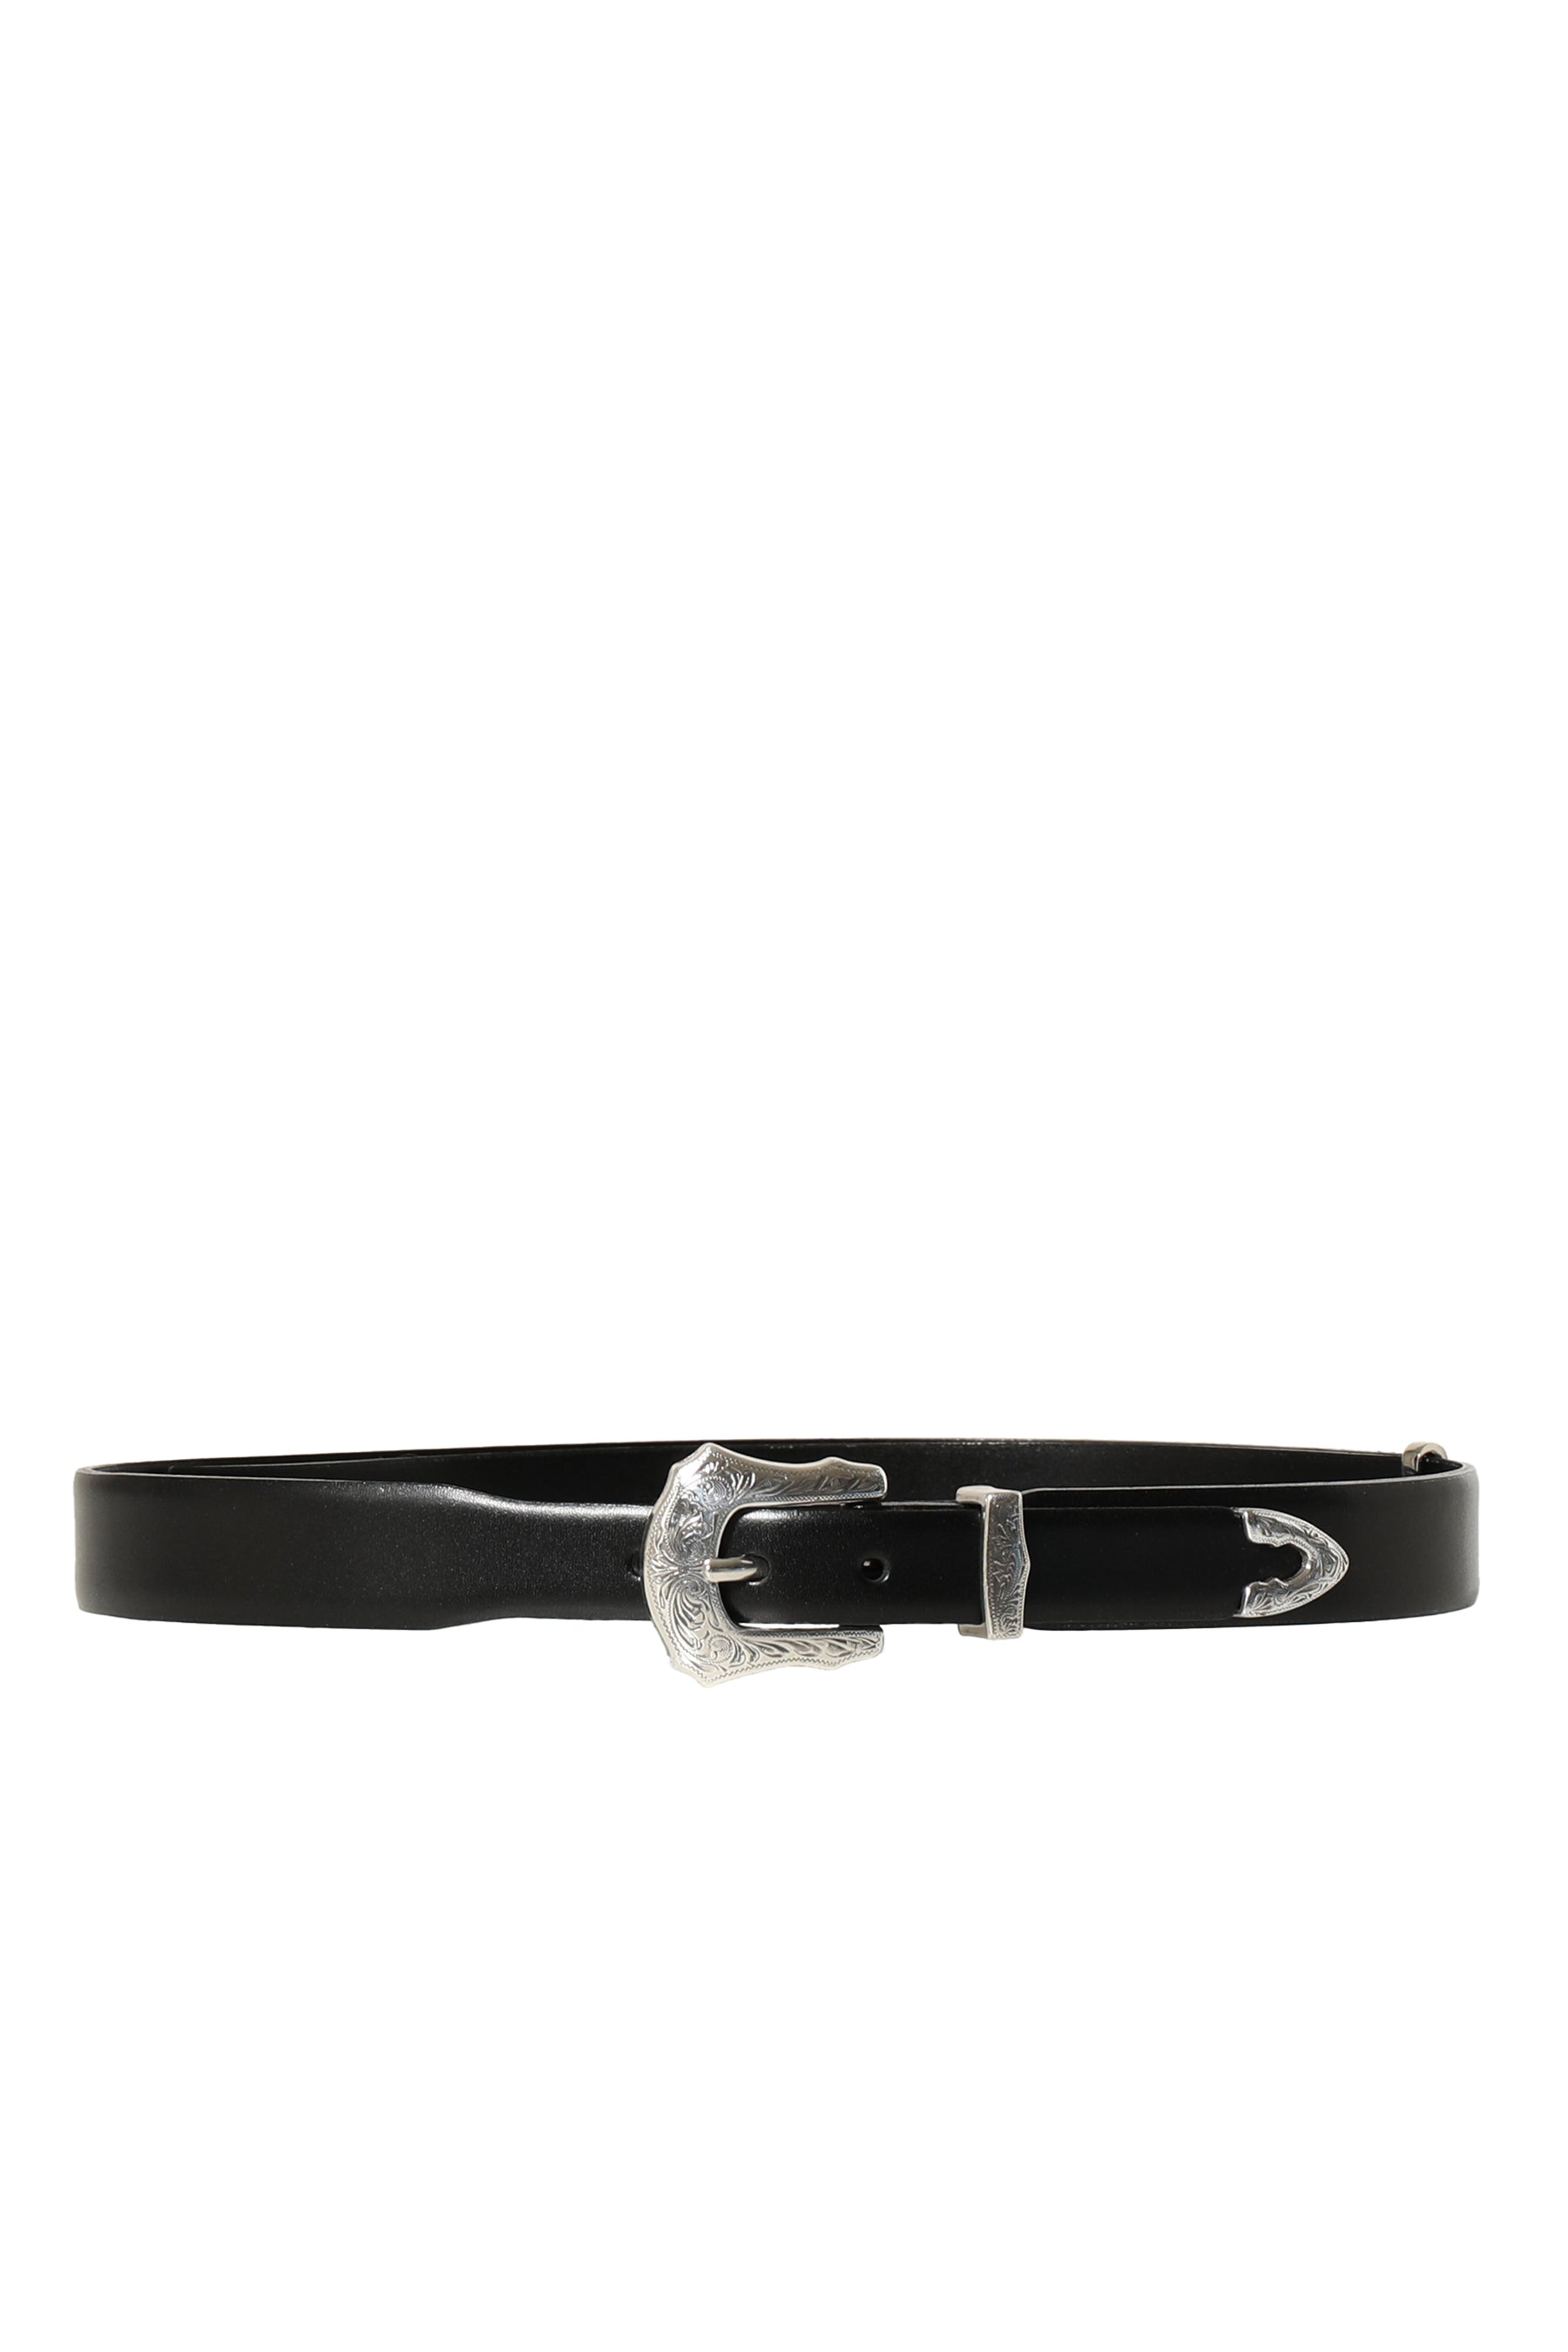 TOGA ARCHIVES トーガアーカイブ FW23 METAL BUCKLE BELT / BLK -NUBIAN